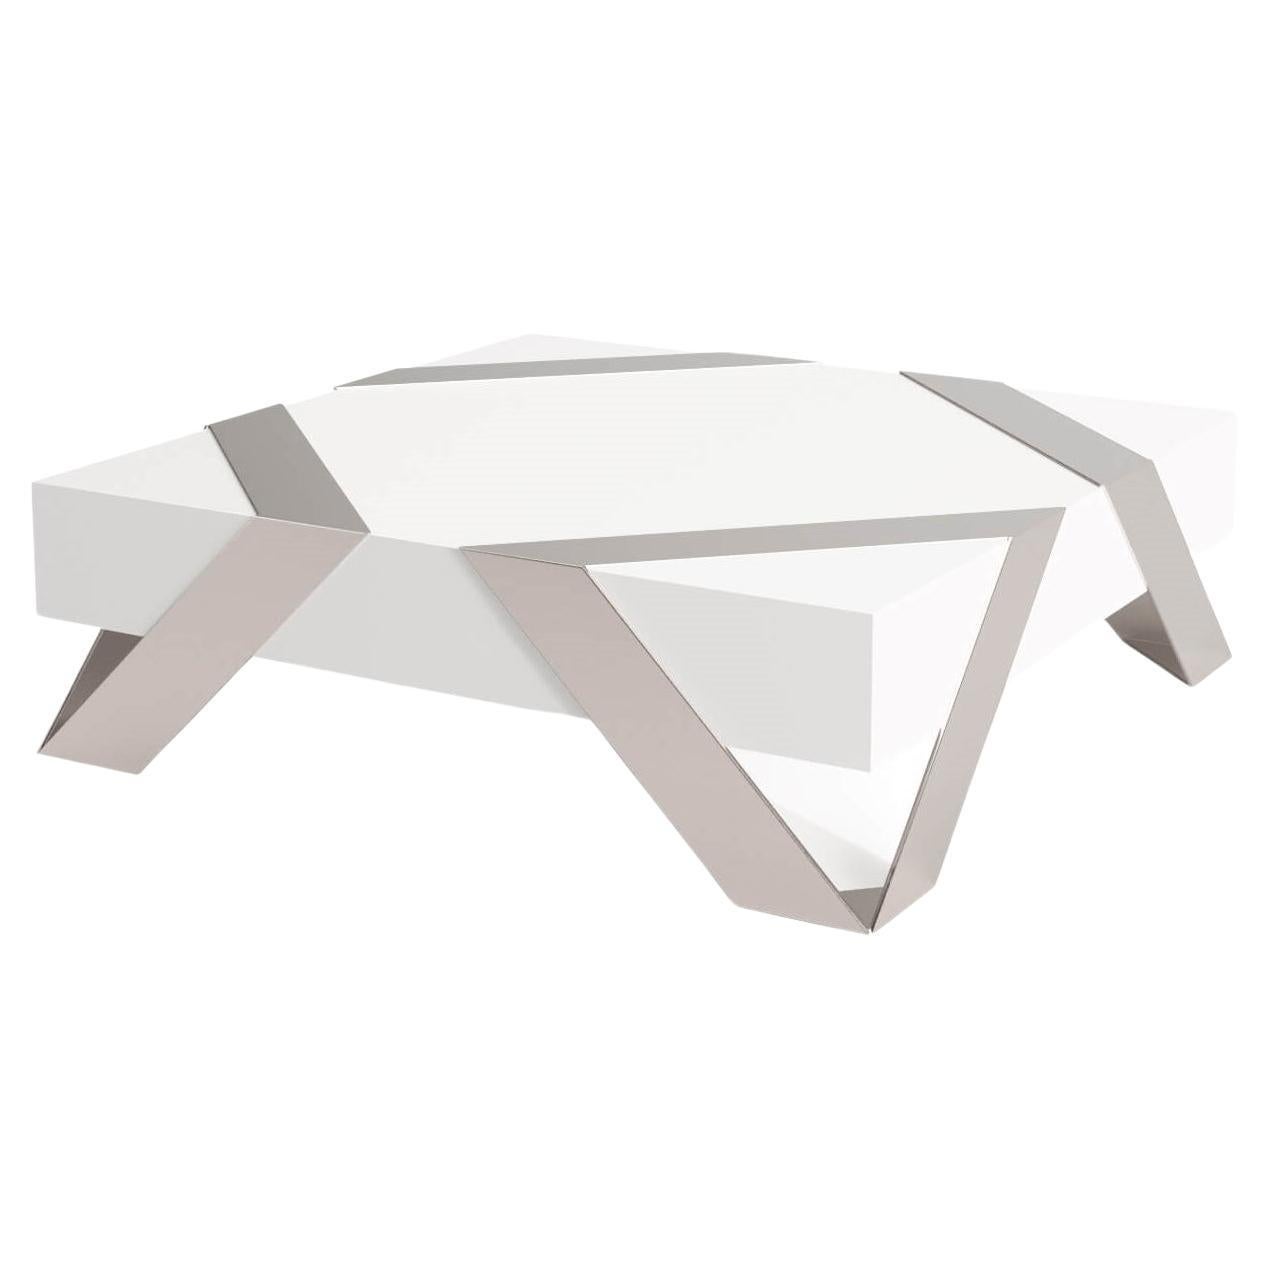 Modern Minimalist Square Coffee Table White Lacquer Brushed Stainless Steel For Sale